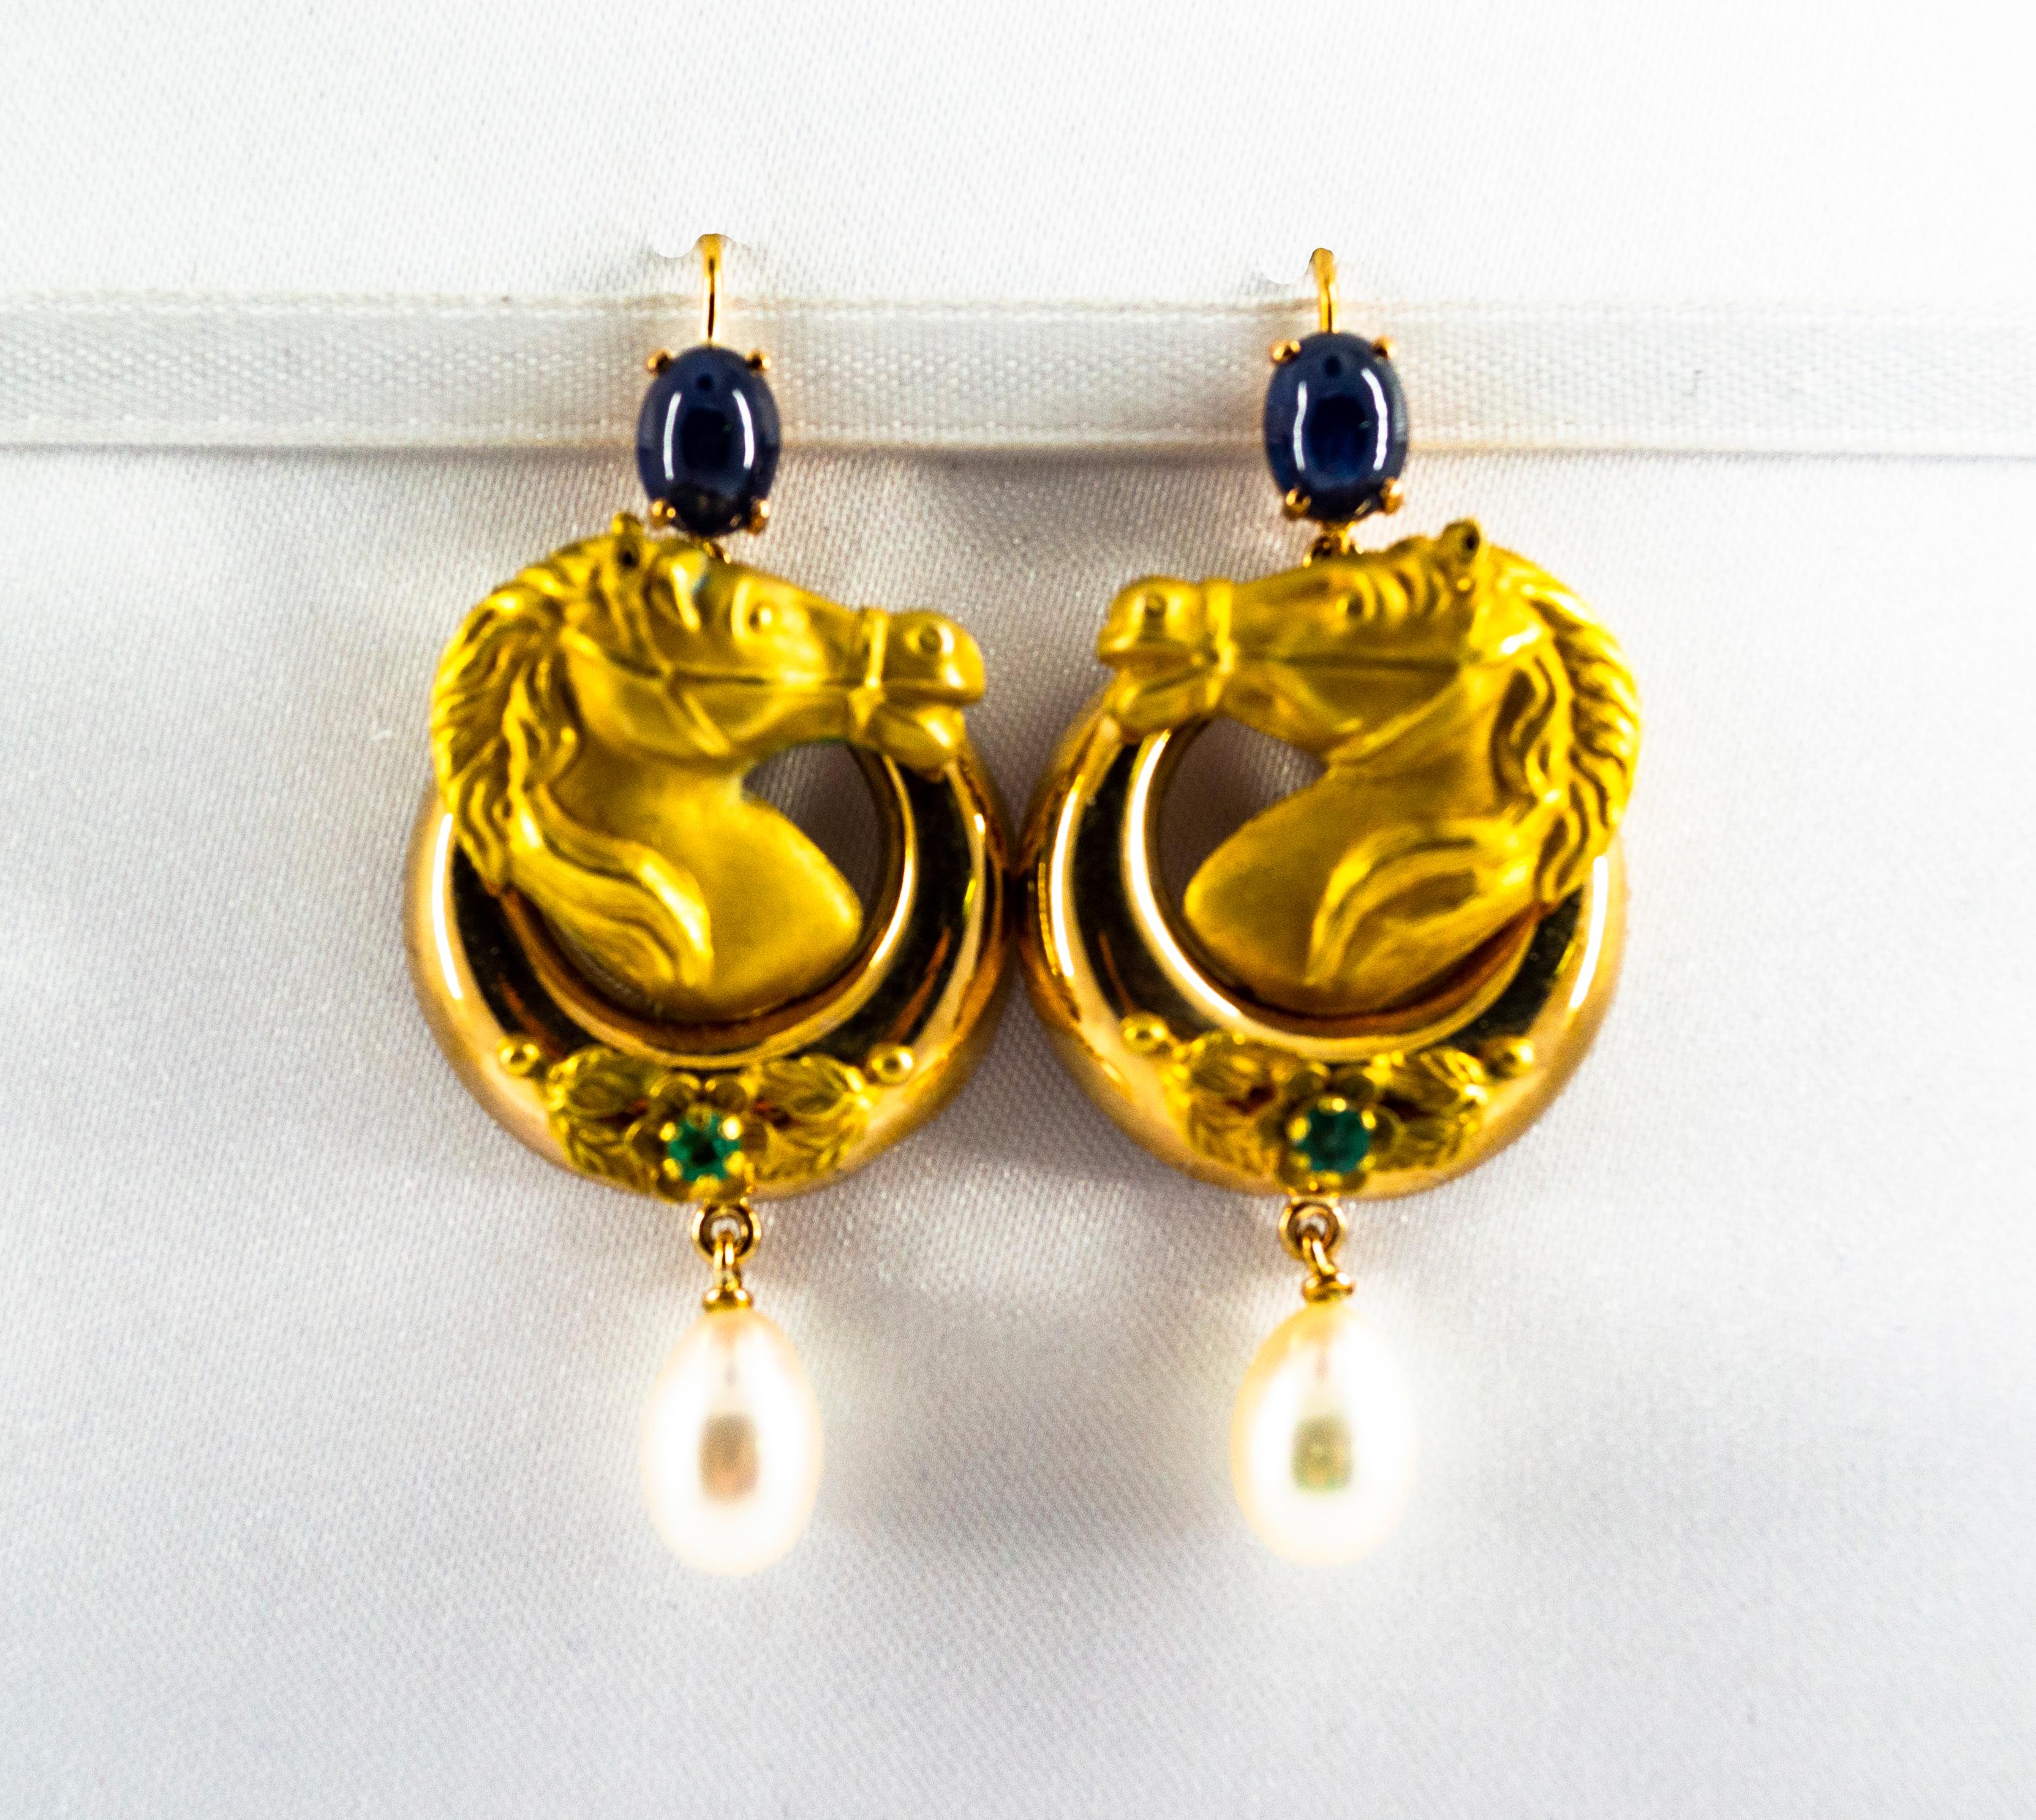 These Earrings are made of 14K Yellow Gold.
These Earrings have 2.30 Carats of Blue Sapphires and Emeralds.
These Earrings have two Pearls.
All our Earrings have pins for pierced ears but we can change the closure and make any of our Earrings